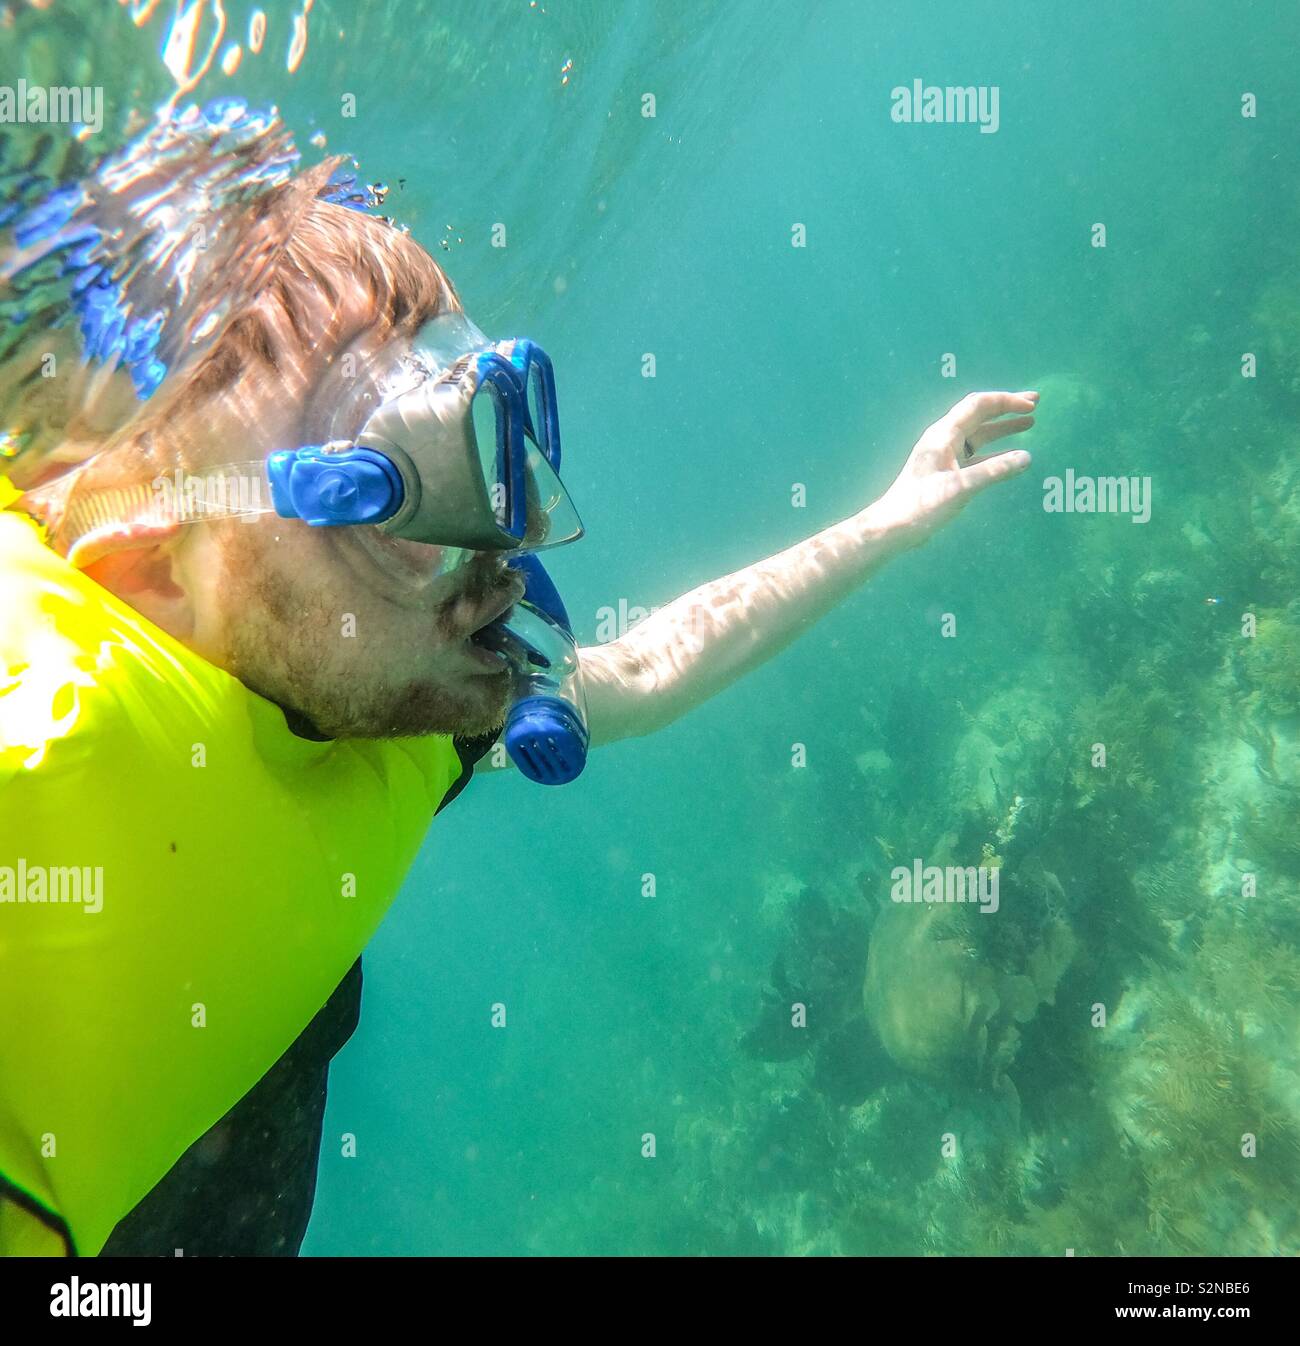 Underwater picture of man snorkelling Stock Photo